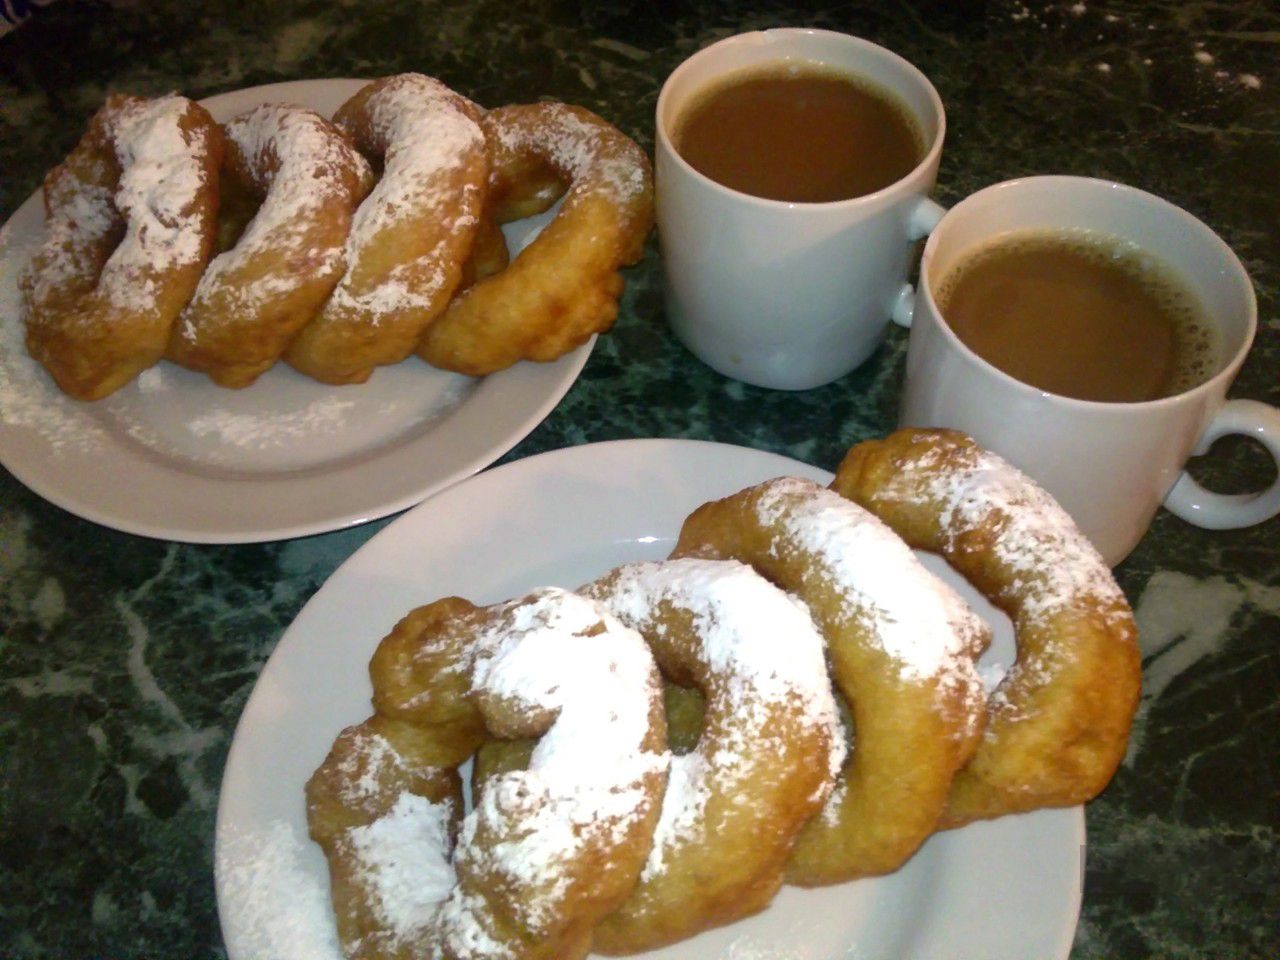 pishkis are ring doughnuts dusted with powdered sugar.